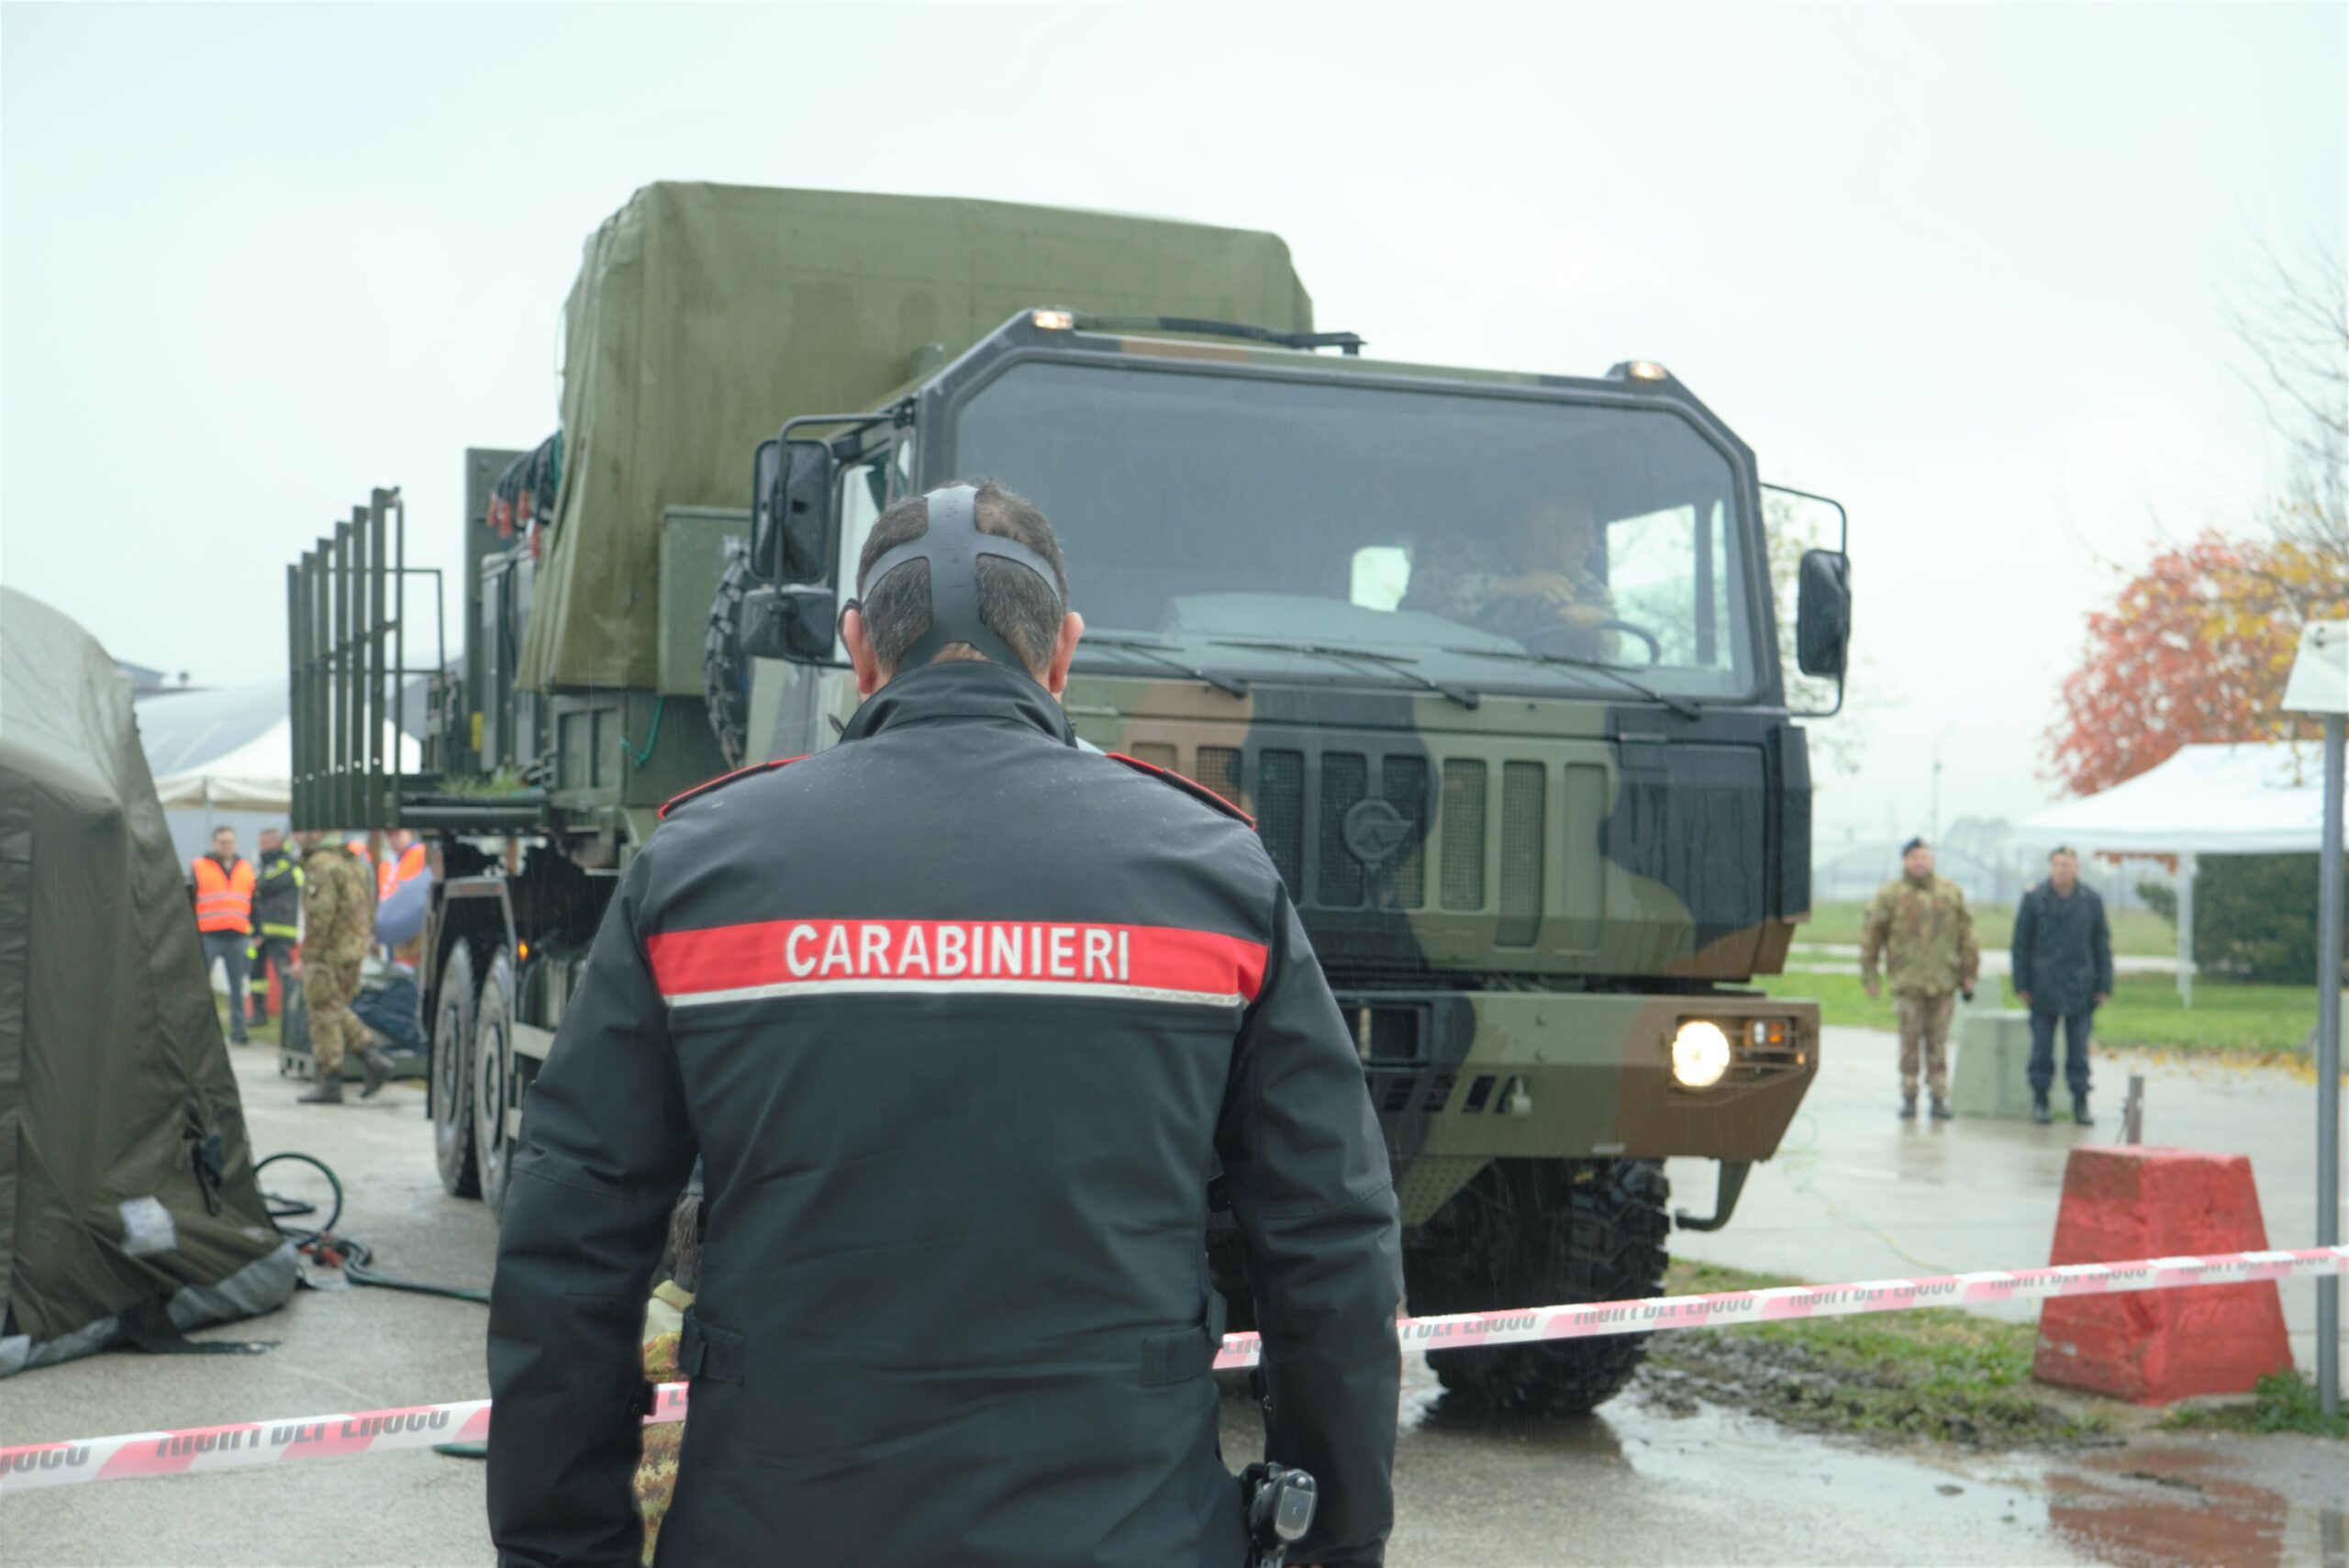 In front of the photo, a man is standing and we see him from behind, on his uniform Carabinieri is written. You can also see black straps on his head which implies he is wearing a mask. In the middle of the photo an army truck/lorry is shown. A man is sitting inside of the truck at the driver's spot.